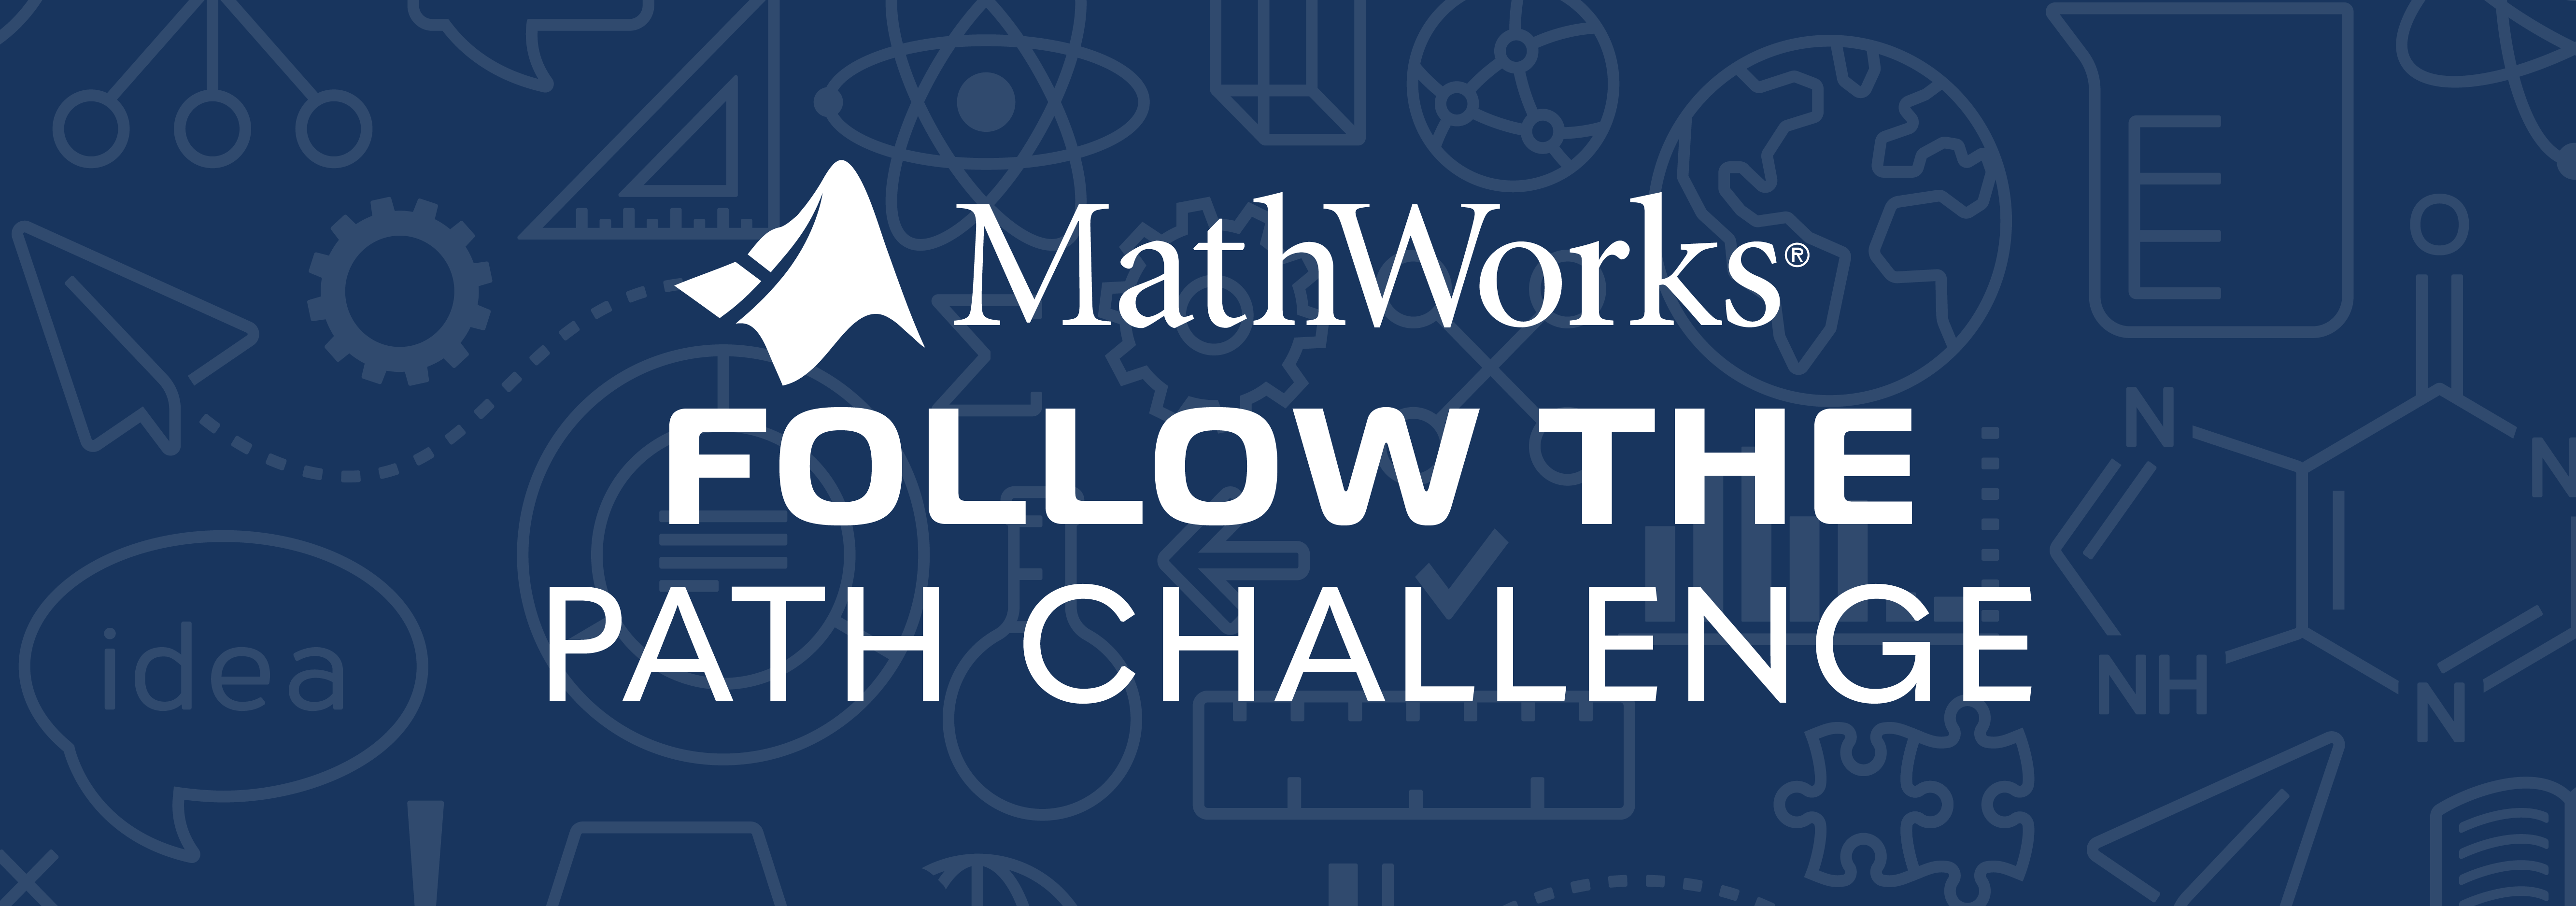 Wednesday January 11th at 6:30pm Central  - MathWorks FollowThePath Online Challenge Webinar